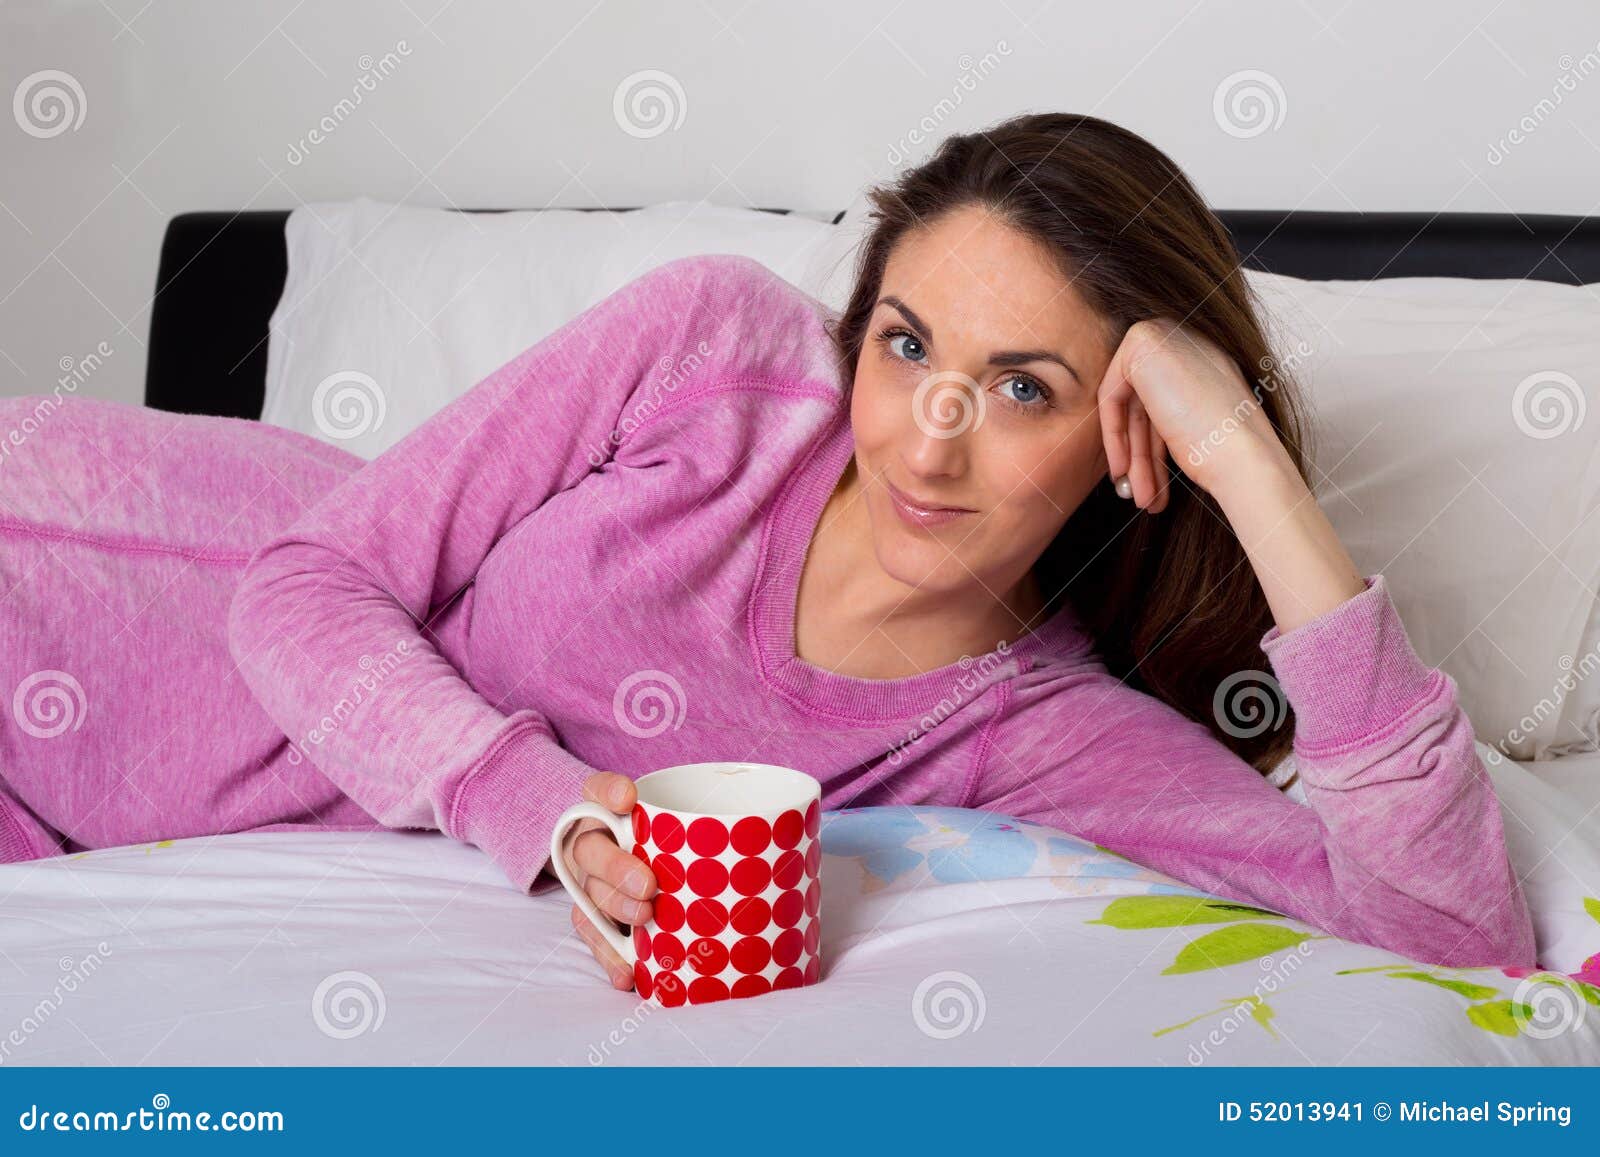 Coffee At Home Stock Image Image Of Female Bedroom 52013941